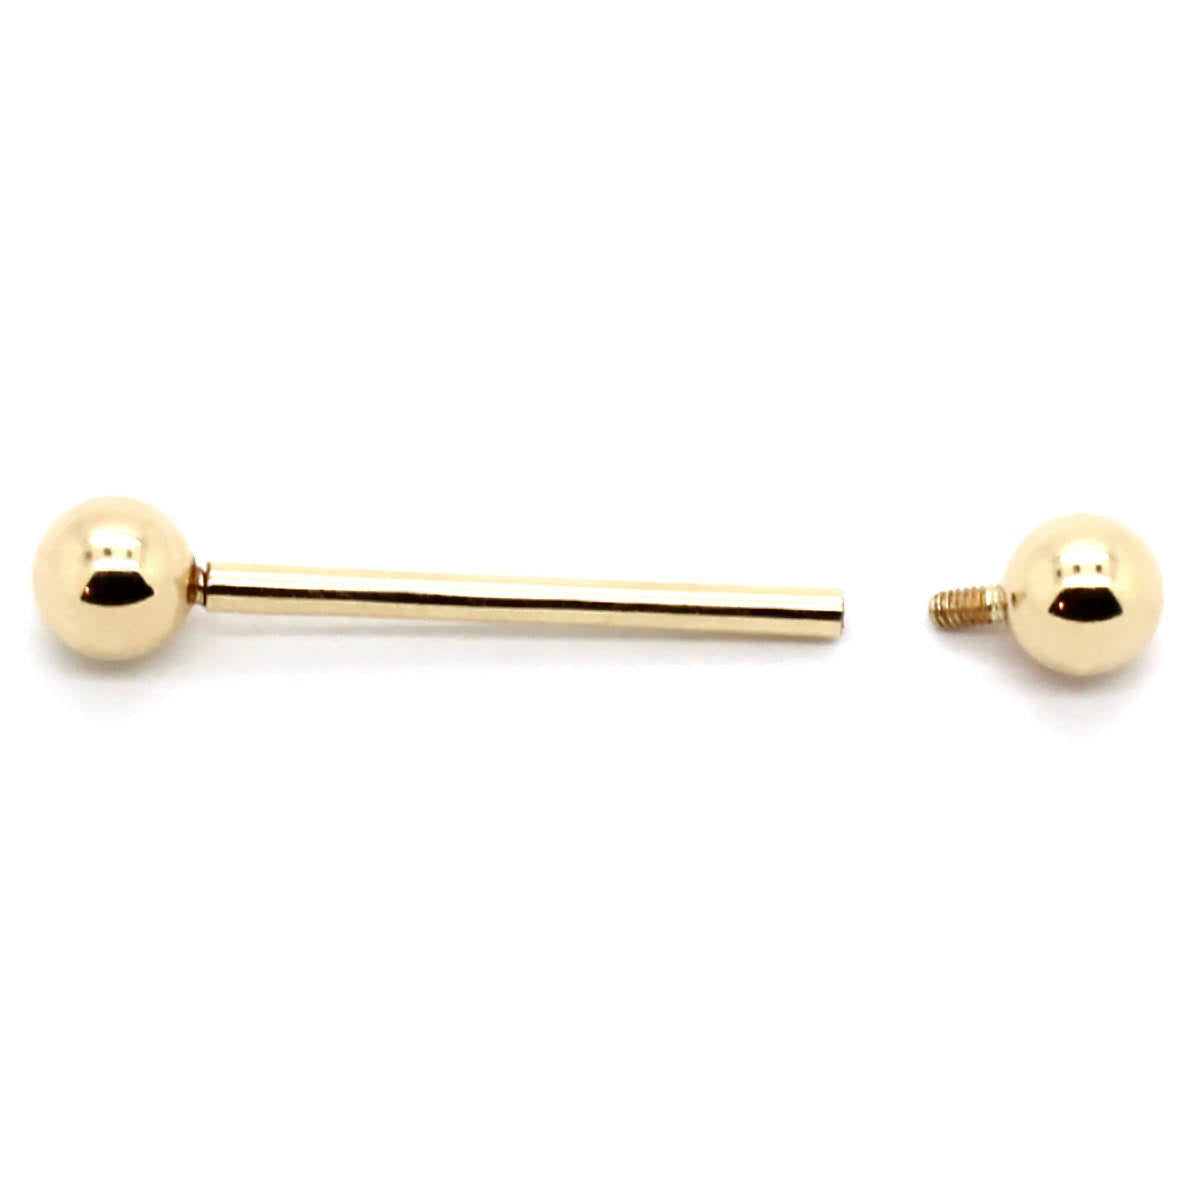 14k Yellow Or White Gold Straight Barbell Internal Threading With Screw Balls